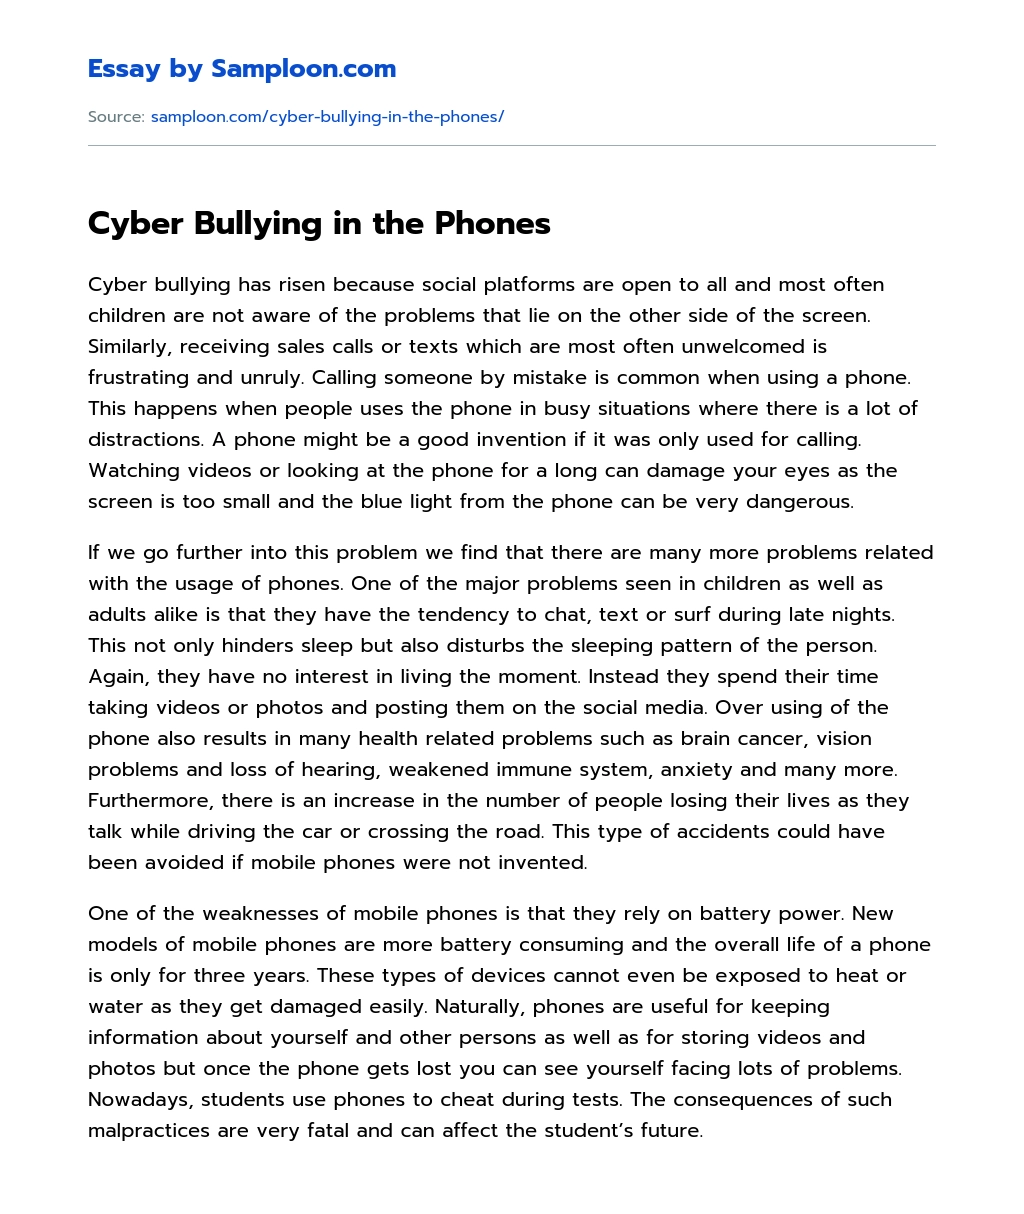 Cyber Bullying in the Phones essay